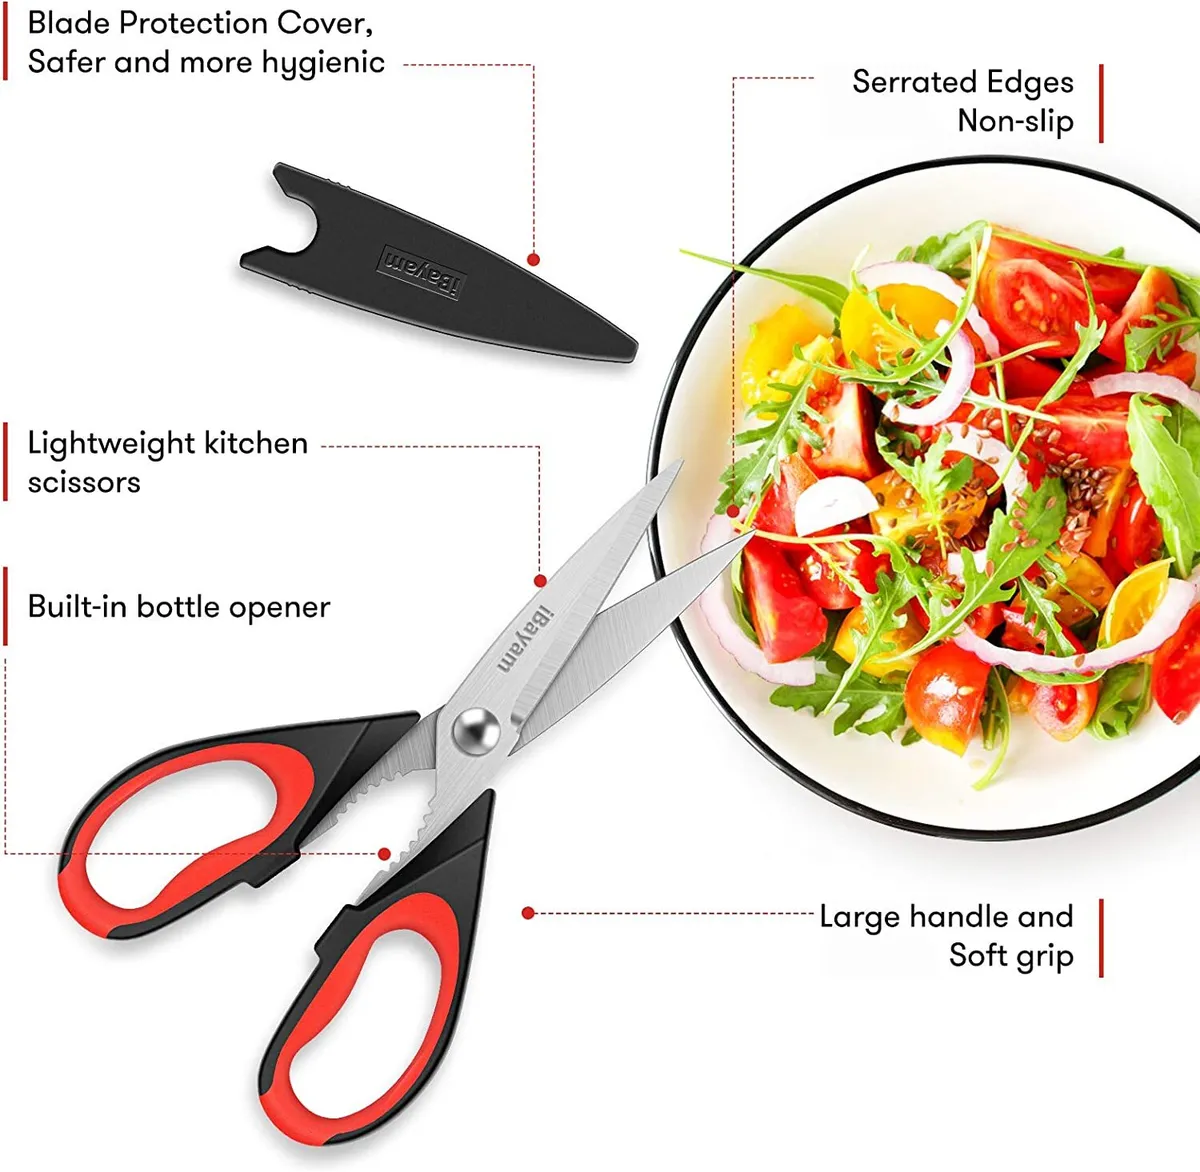 Kitchen Shears, iBayam Kitchen Scissors Heavy Duty Meat Scissors Poultry Shears, Dishwasher Safe Food Cooking Scissors All Purpose Stainless Steel